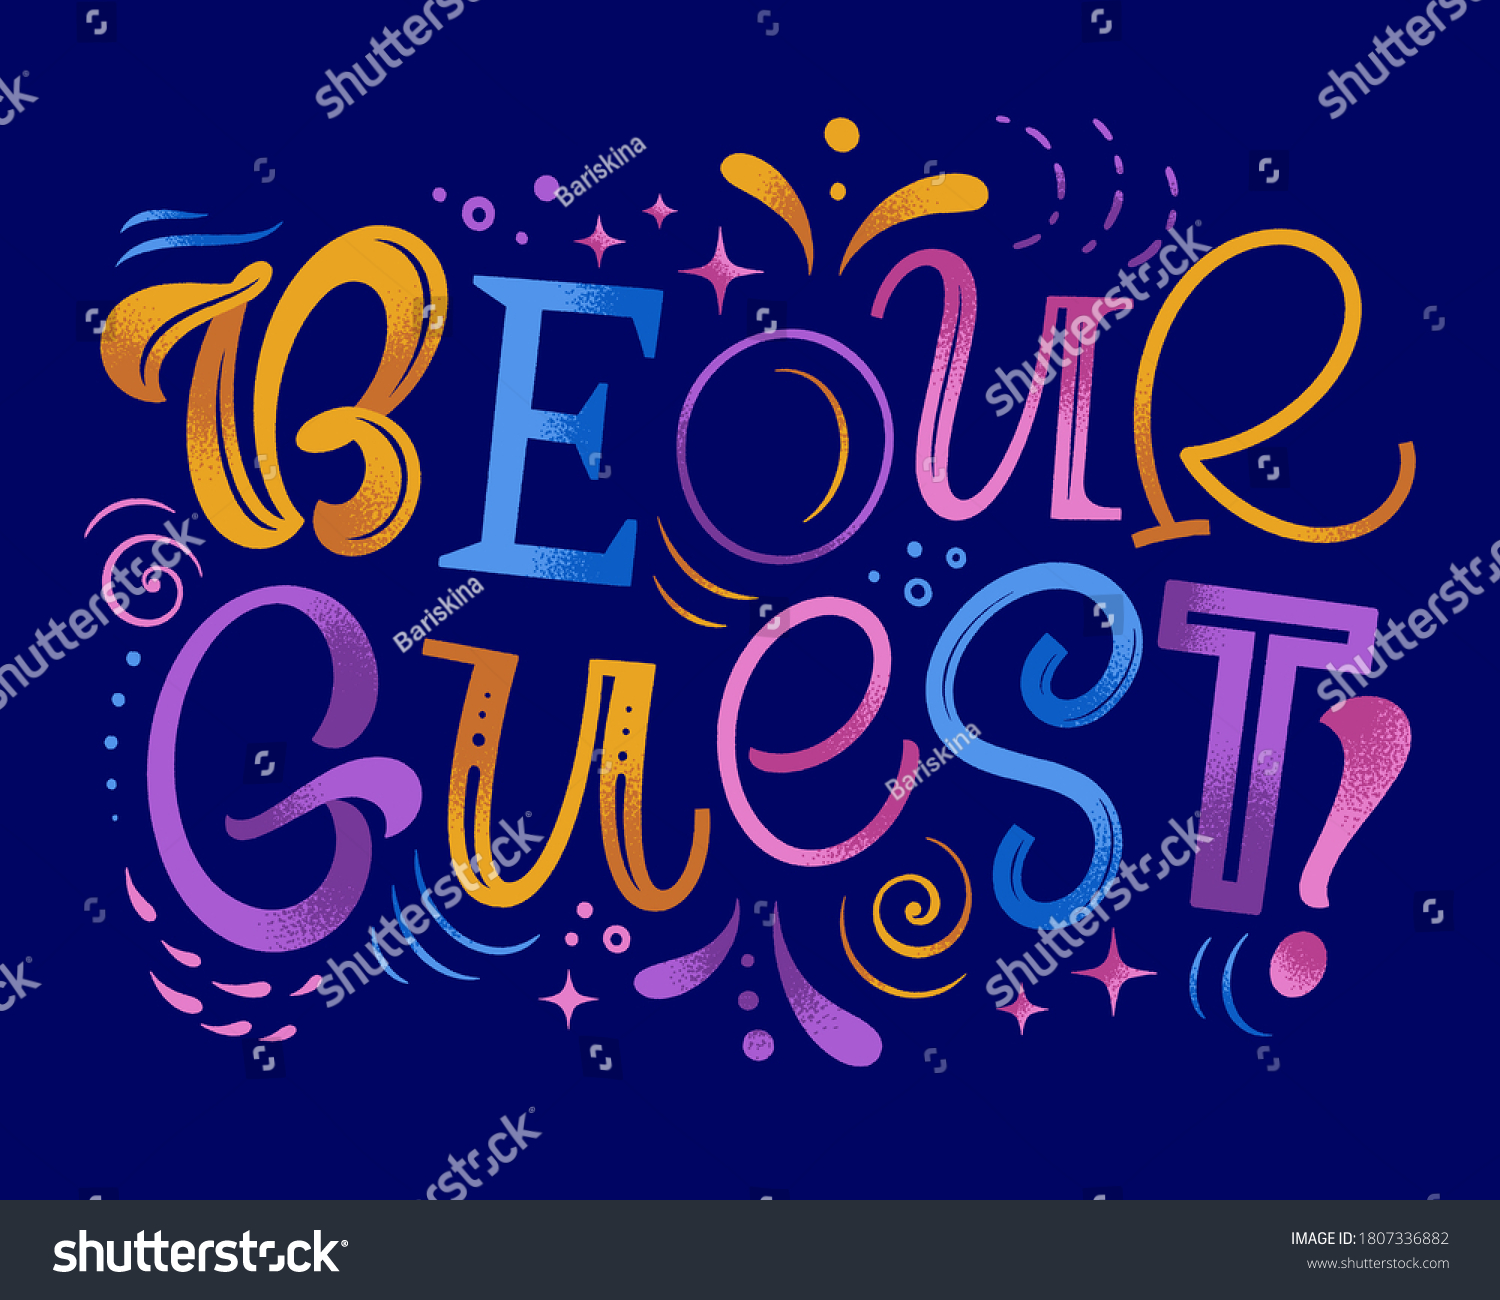 SVG of Be our guest vector illustration. Hand drawn lettering for invitations,  greeting card, template, event prints and posters. Festive design with graphic elements for social media svg